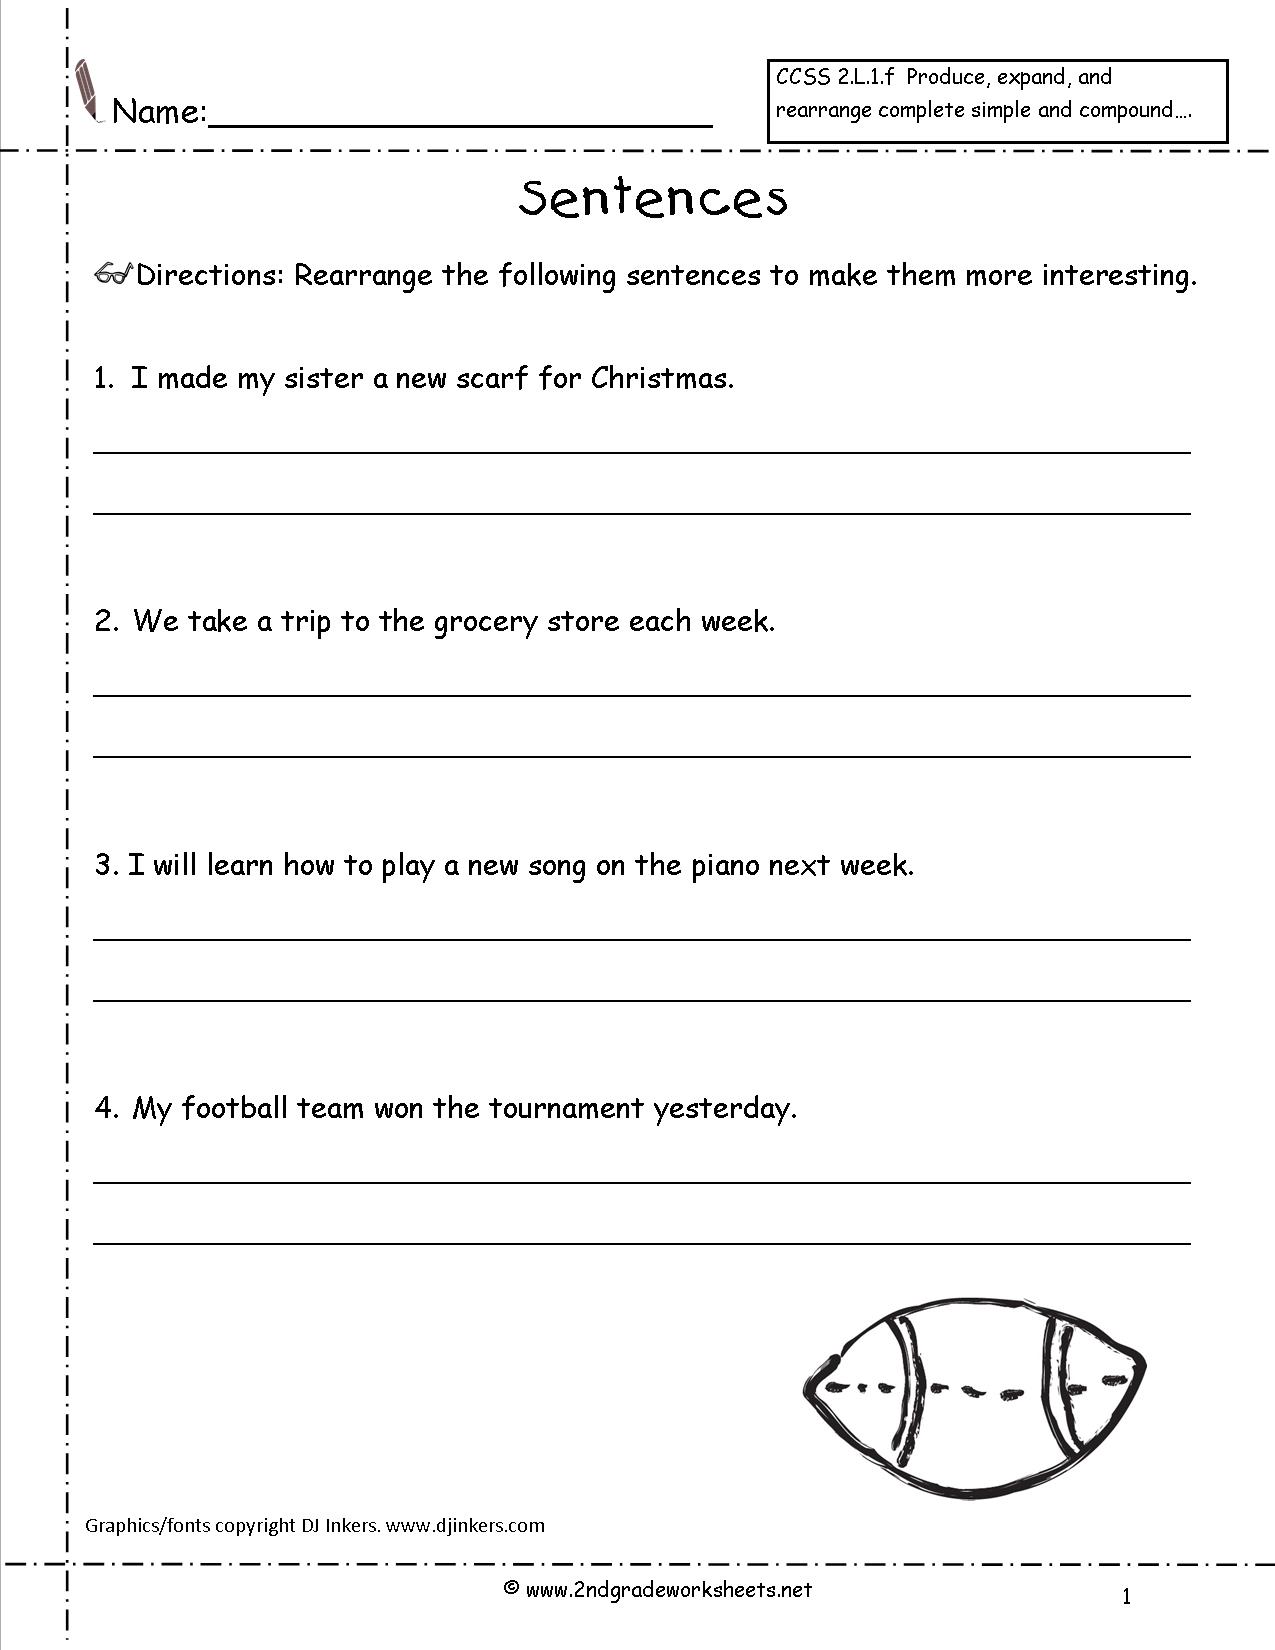 How To Write A Complete Sentence Worksheet